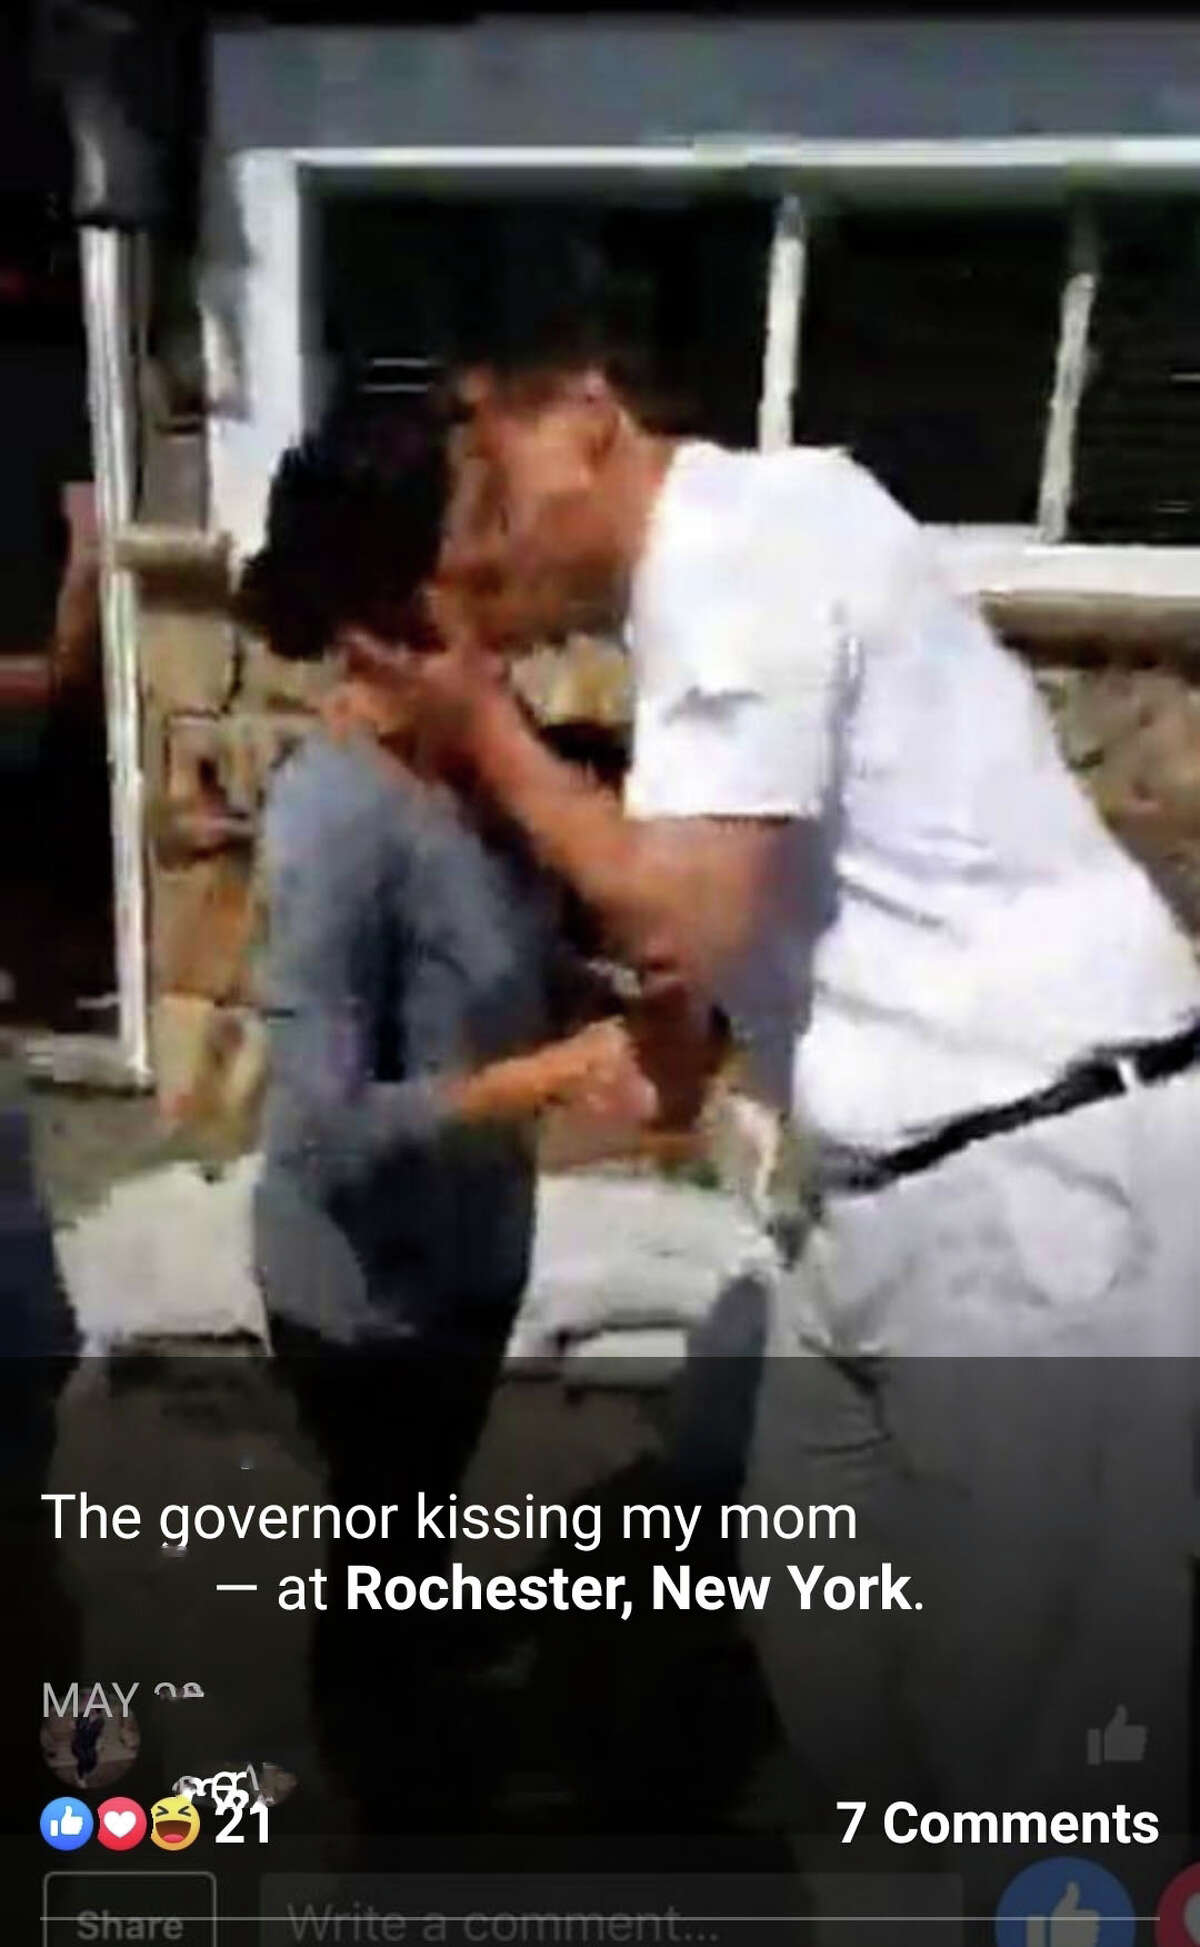 Sherry Vill, 55, said Gov. Andrew M. Cuomo kissed her on the cheek more than once without her consent while visiting Vill's residence in 2017 in Greece, N.Y. The governor was there with a team to view flooding damage along Lake Ontario and Vill said he later wrote her a personal letter and also invited her to an event – without mentioning her husband or family. (Provided photo)